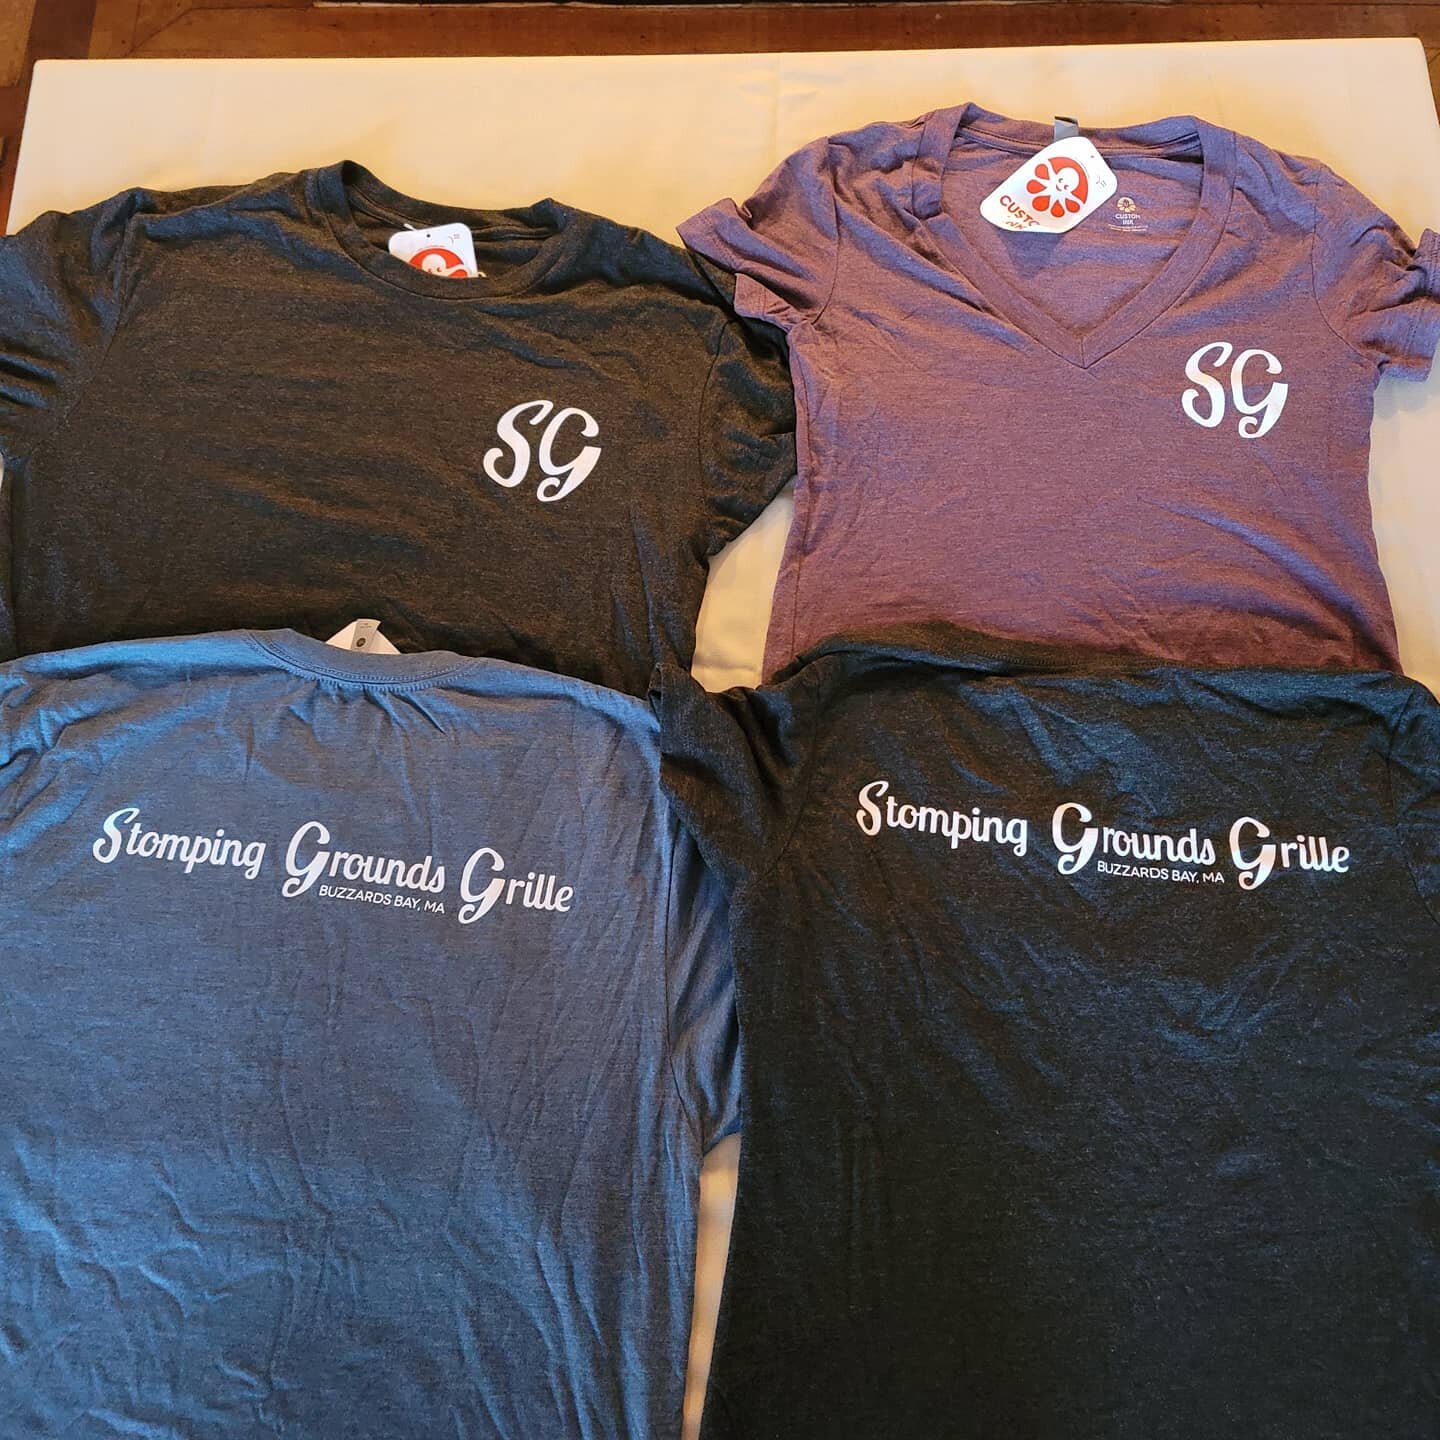 Look what we have available for sale! Limited colors and sizes, for now. Both Crew Neck and V Neck. Extremely light and comfortable, Next Level tri-blend shirts. $25 each. Get em while they're hot! #stompinggroundsgrille #shirts #freepublicity